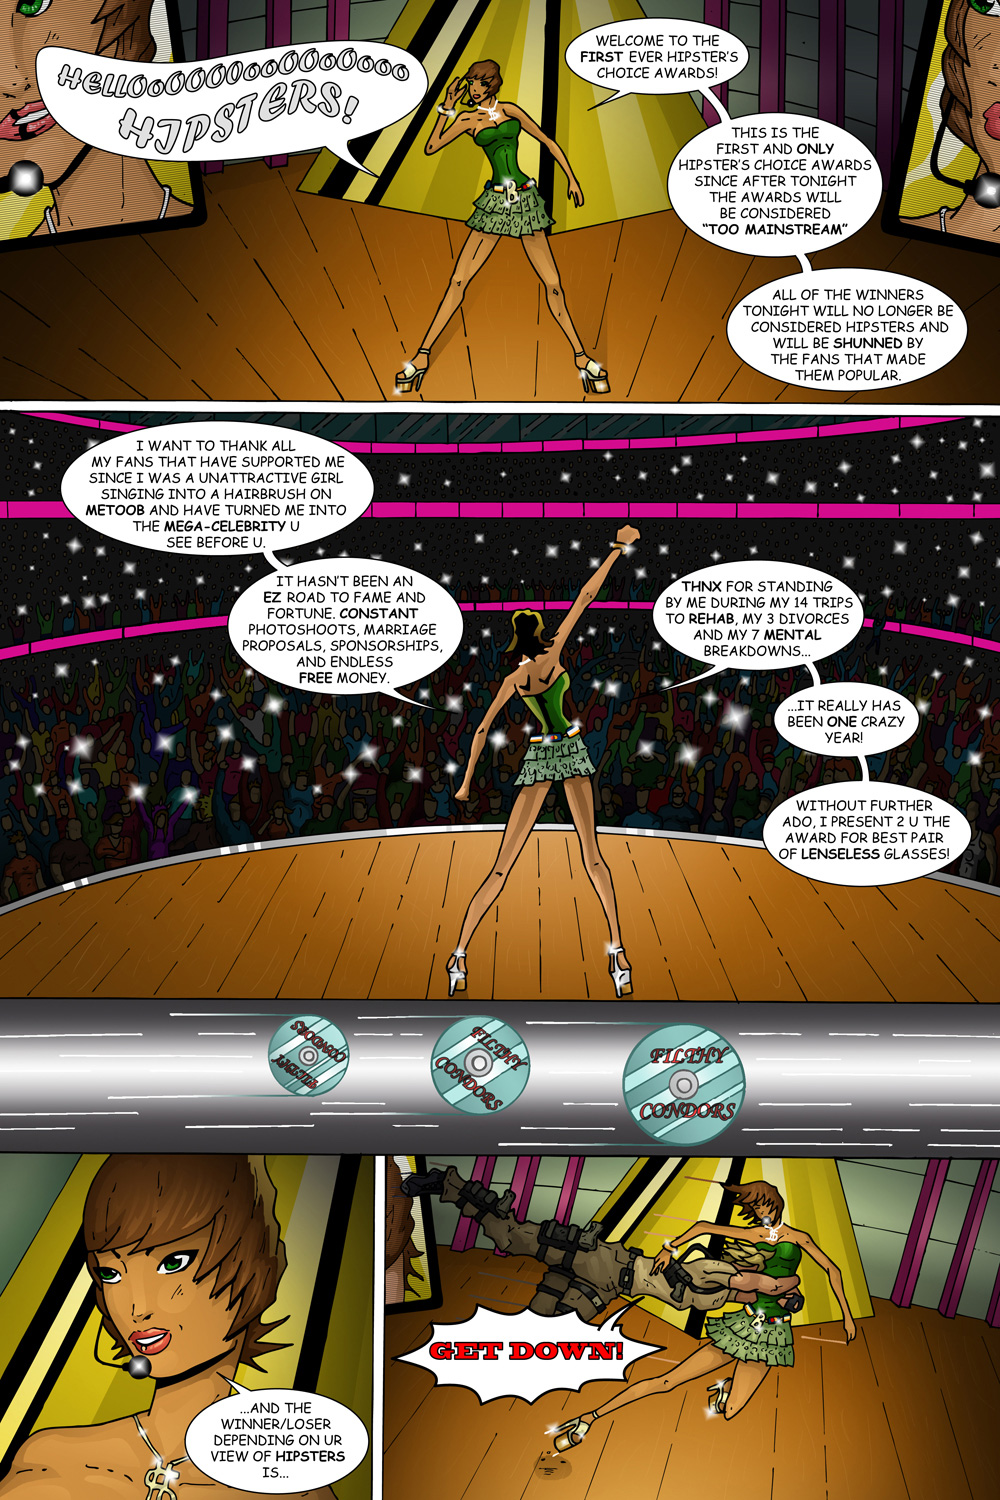 MISSION 004: PAGE 07 “ONE CRAZY YEAR”